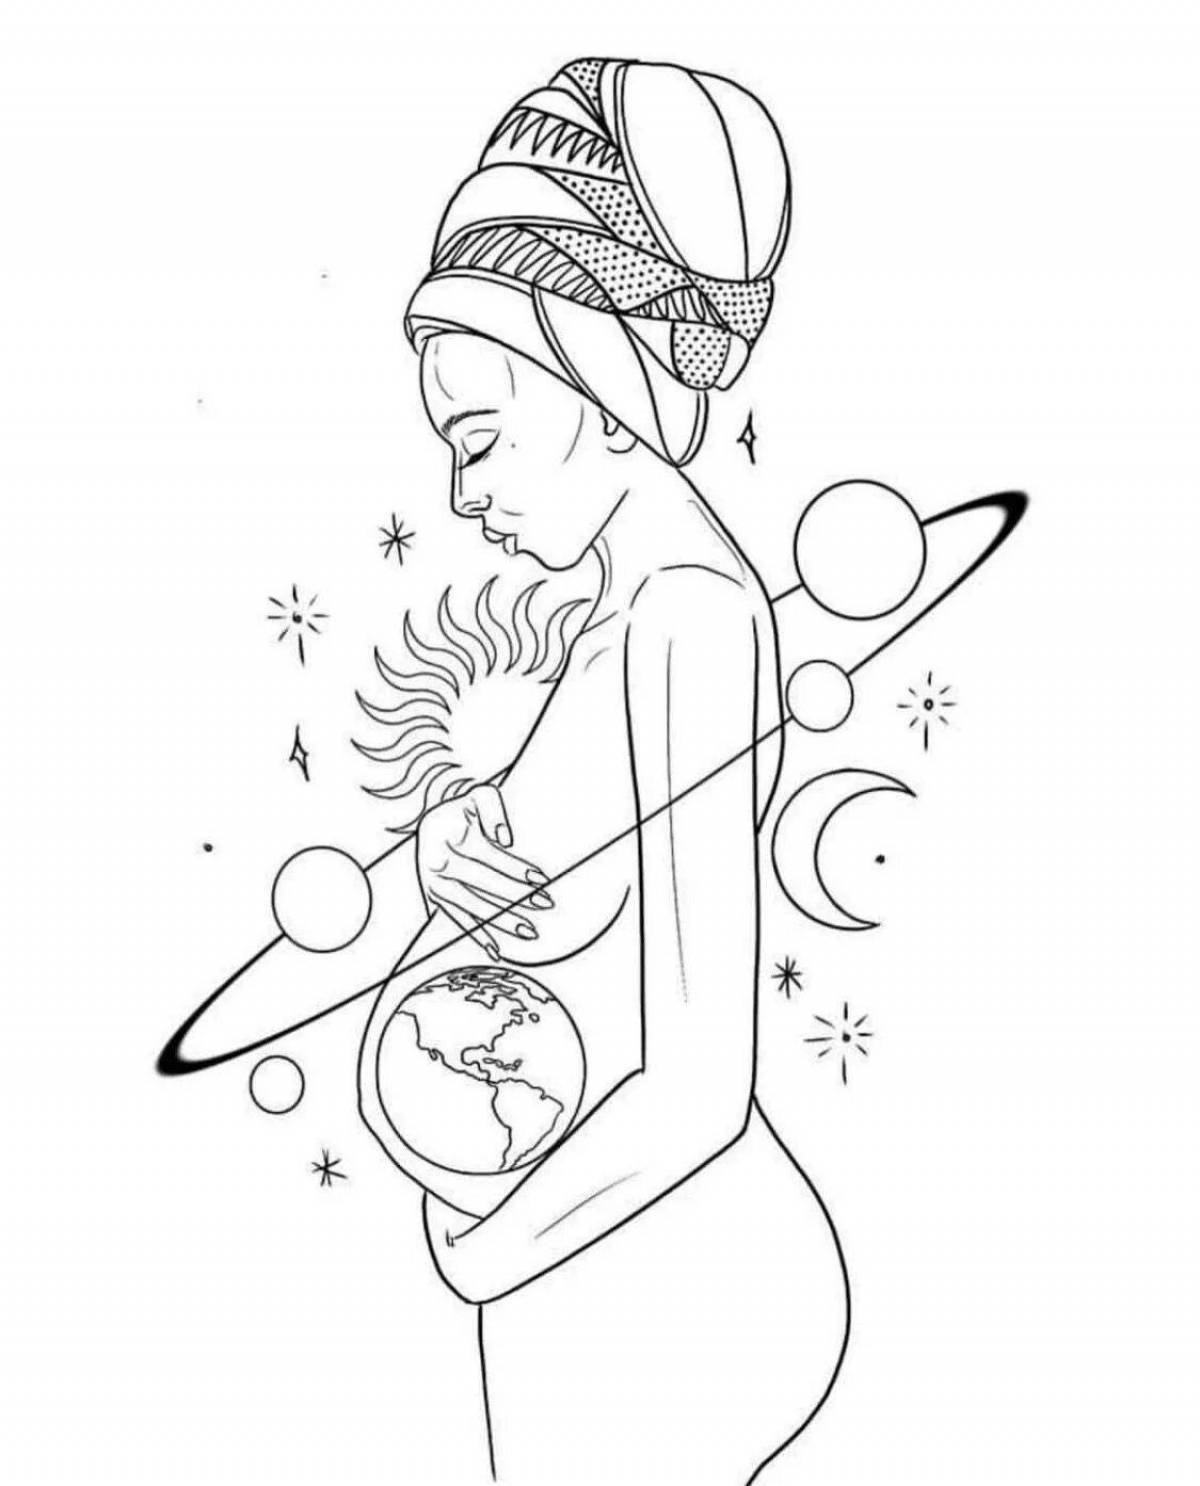 Adorable pregnant mom coloring page